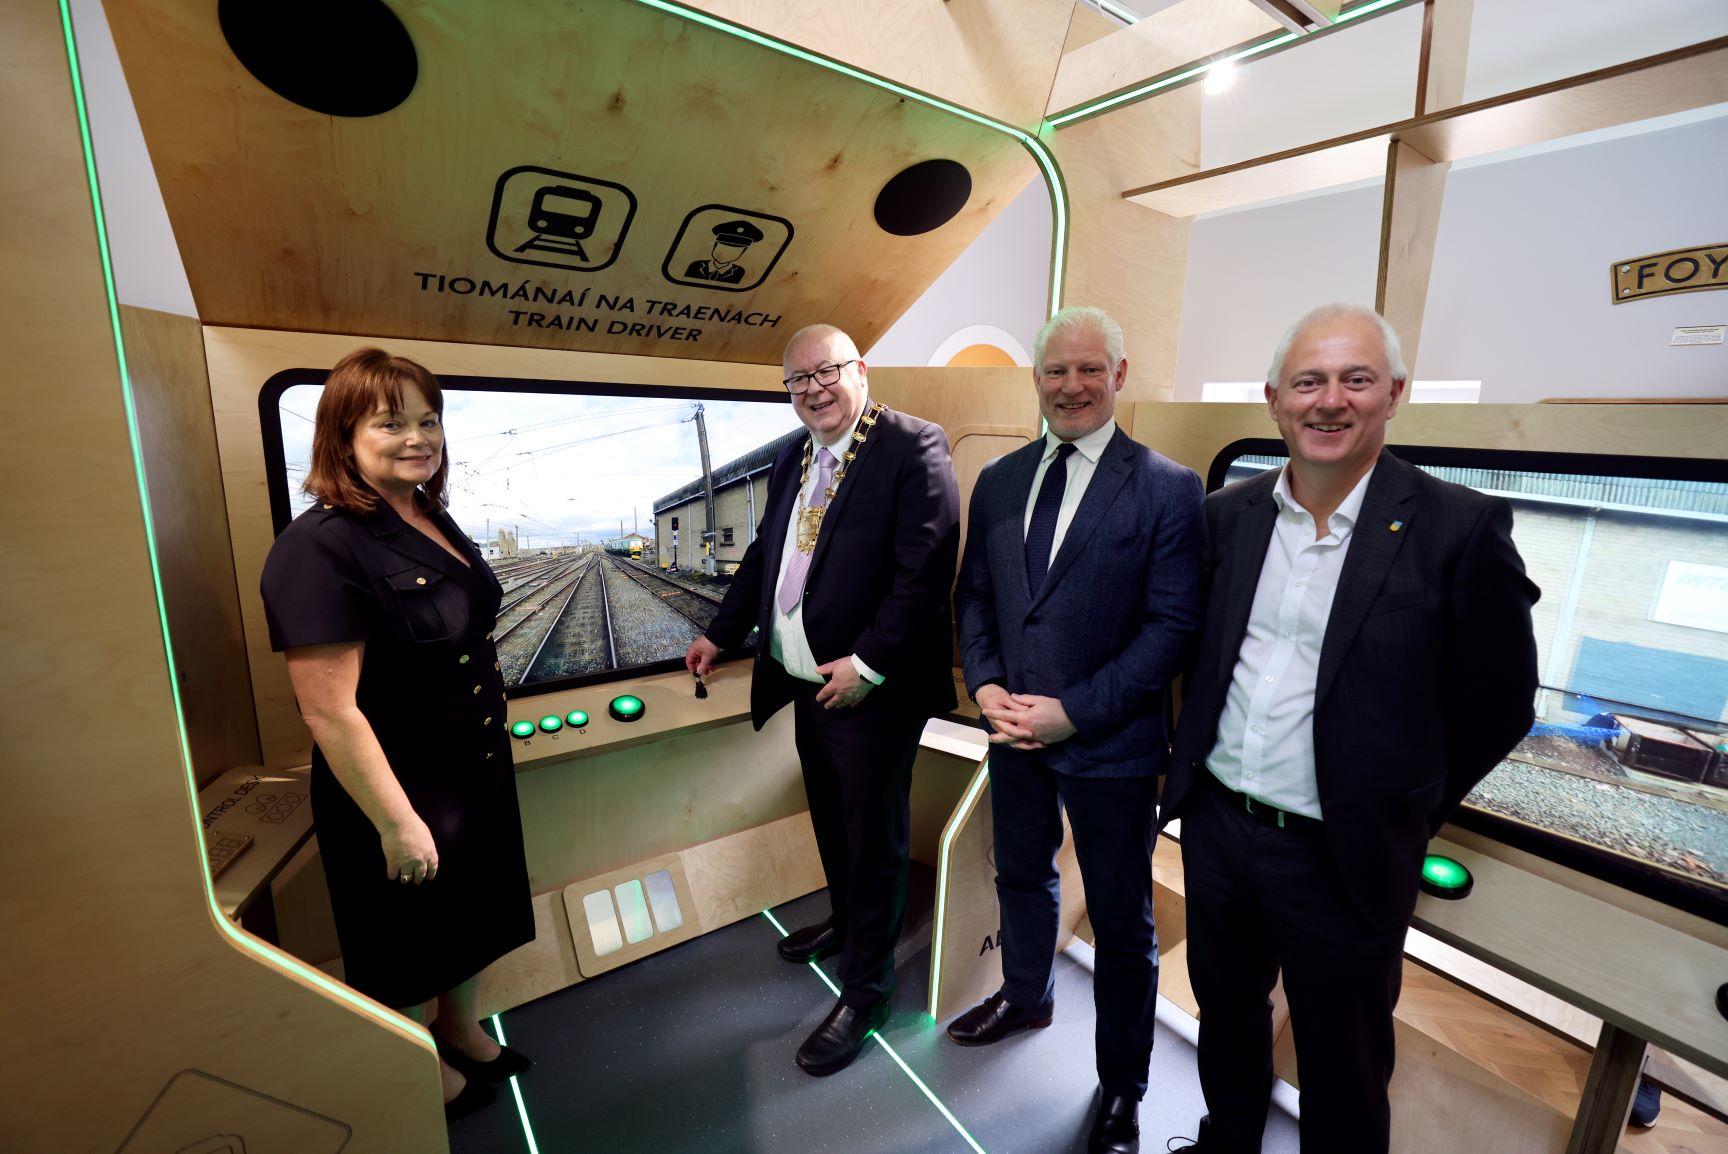 Chief executive of Fingal County Council, AnnMarie Farrelly, alongside the Mayor of Fingal, Cllr Howard Mahony, Managing Director of Alstom Ireland, Piers Wood and Corporate Communications Manager with Iarnród Eireann Barry Kenny